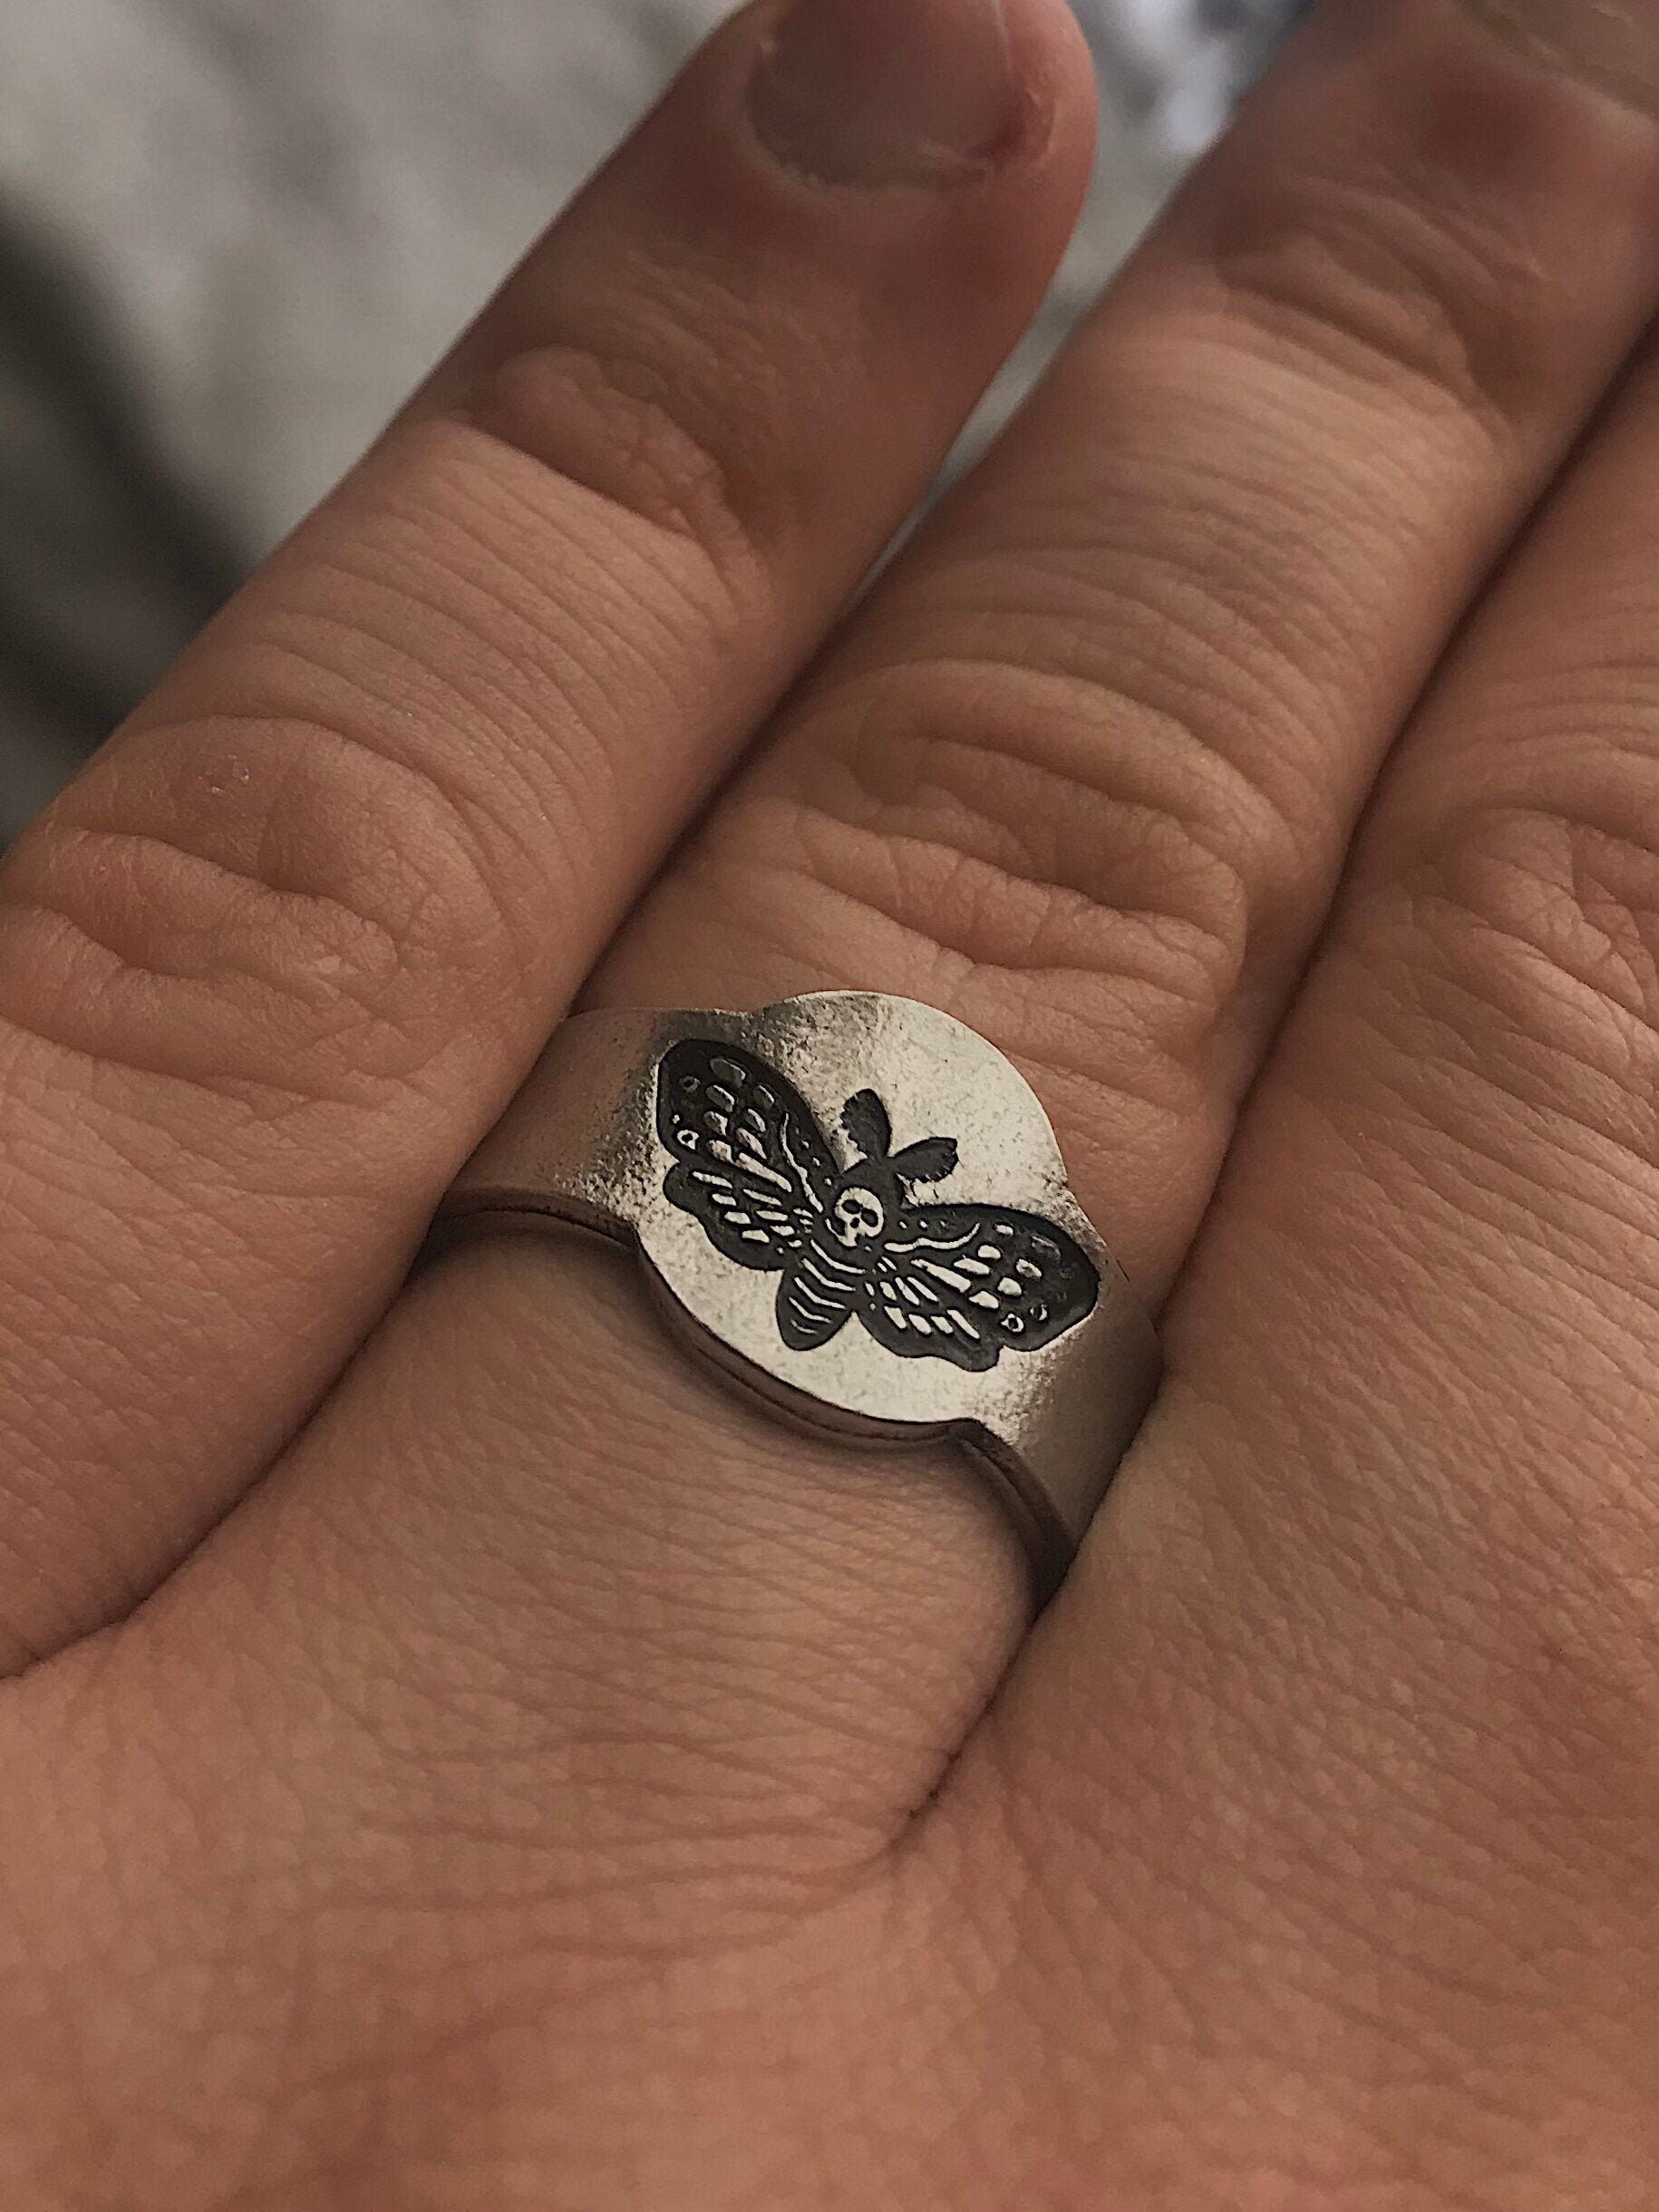 Death Head Moth Signet Style Adjustable Stacking Ring | Goth Ring | Best Friend BFF | Dainty Silver Witch Ring | Skeleton Luna Moth Jewelry